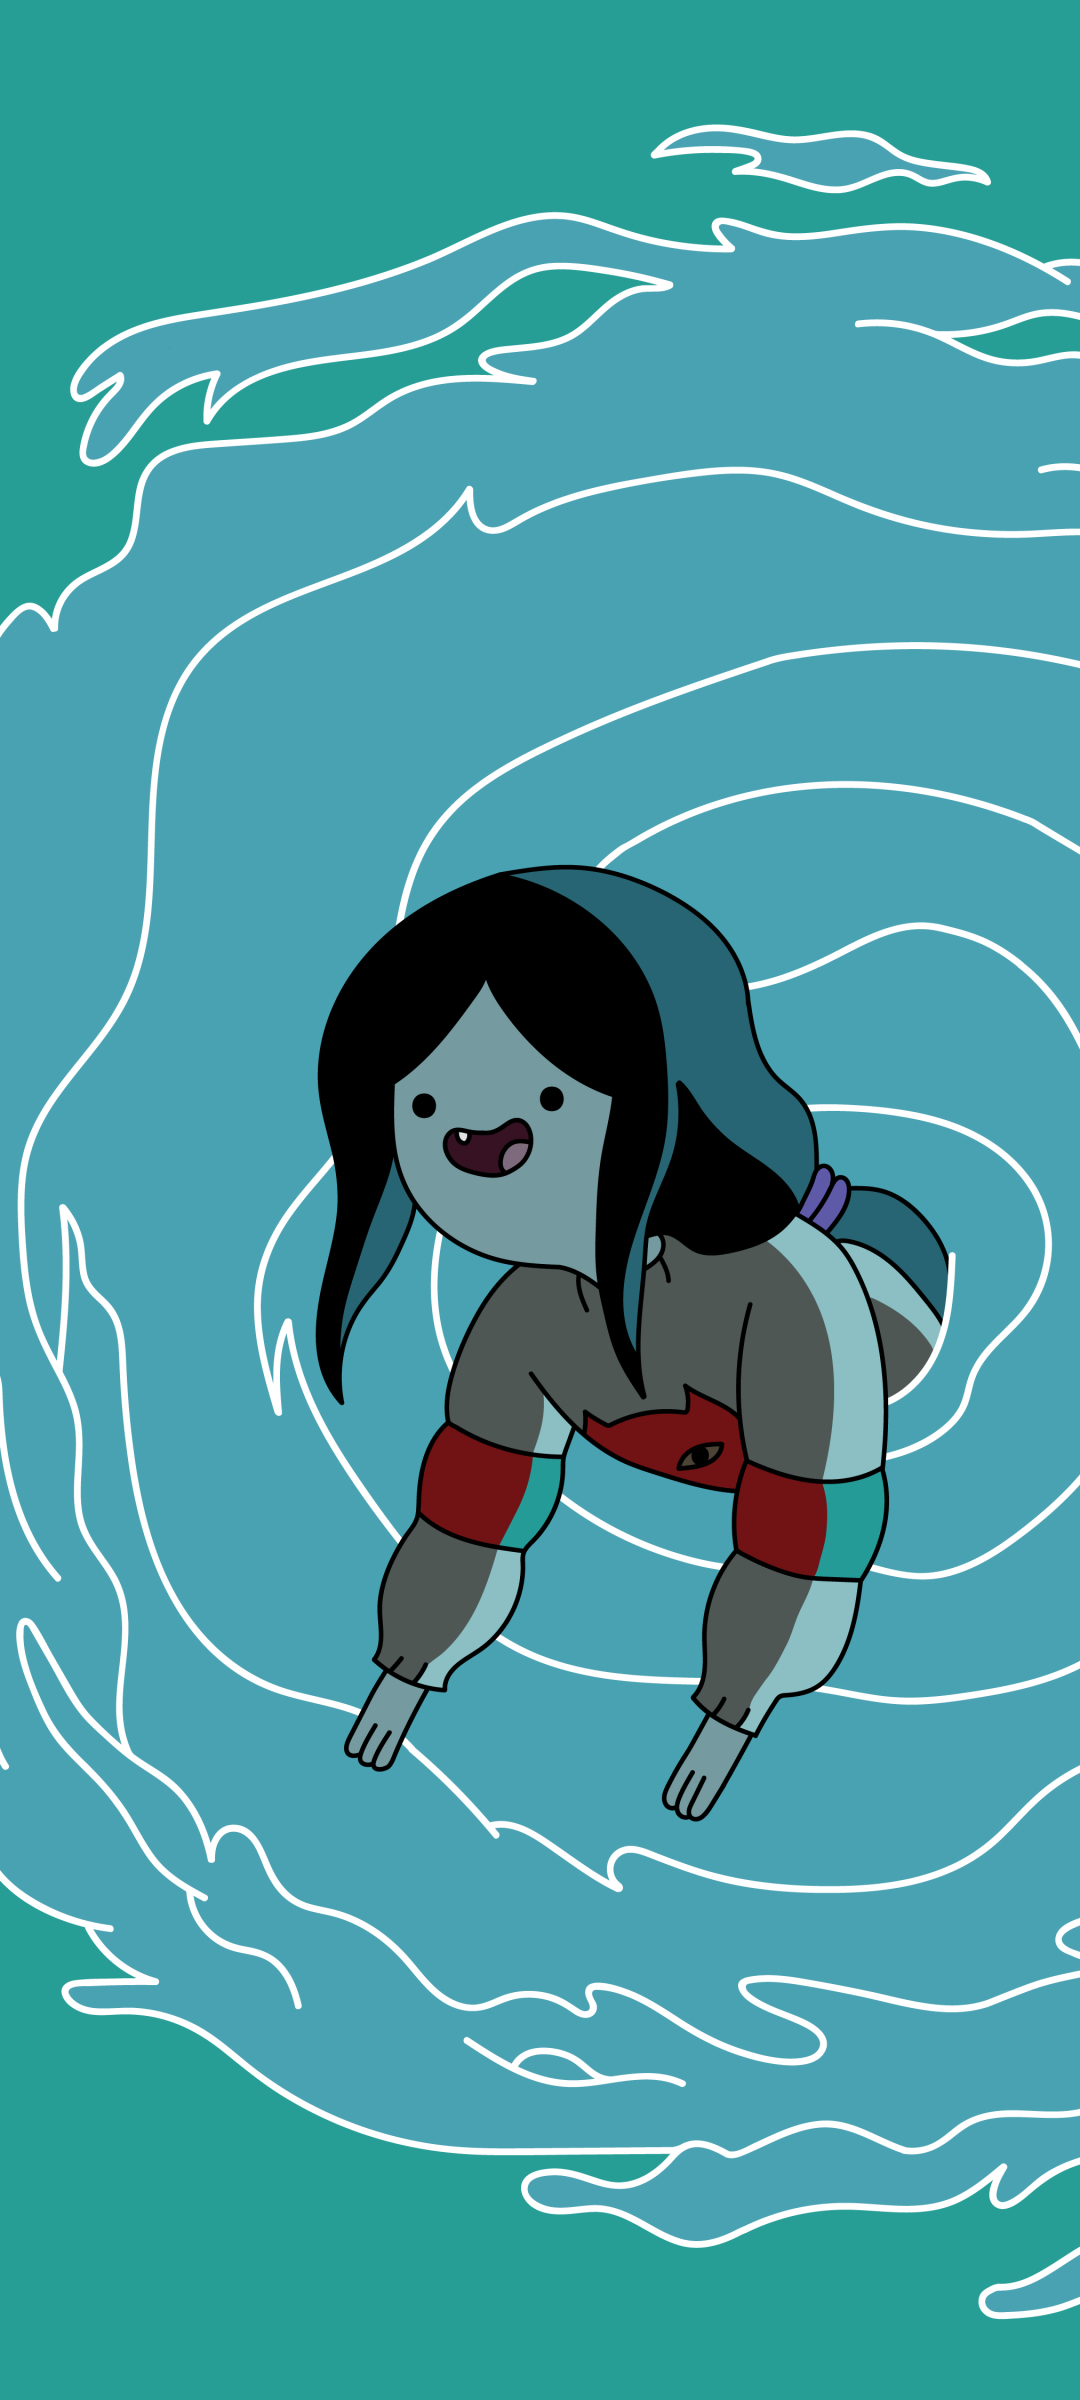 A Marceline wallpaper I made Its not very high quality because my  Illustrator is being silly but I thought you guys might still enjoy it   radventuretime